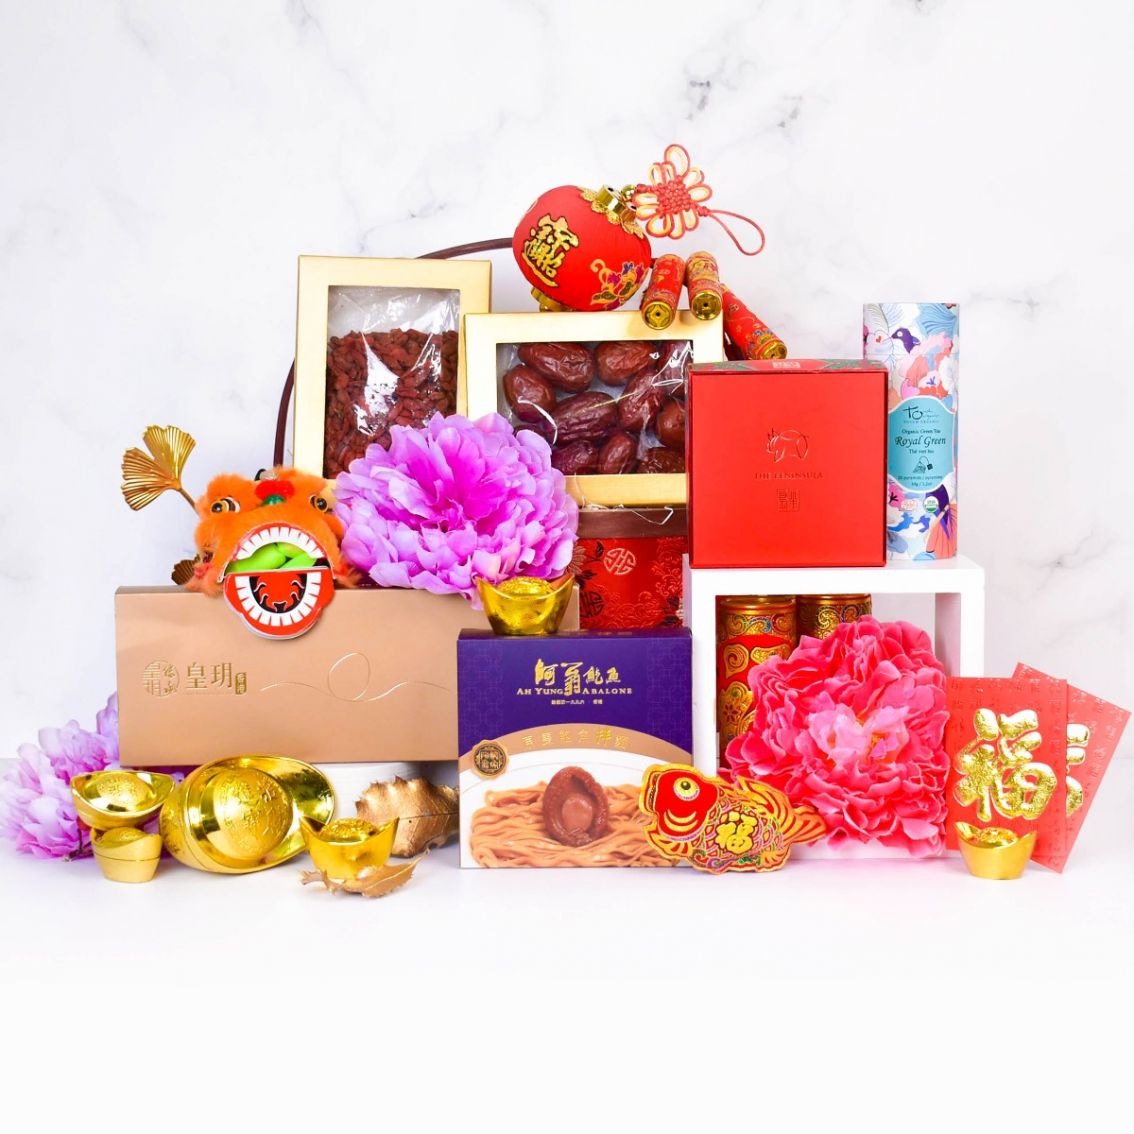 , 2018 Chinese New Year Corporate Gift Ideas